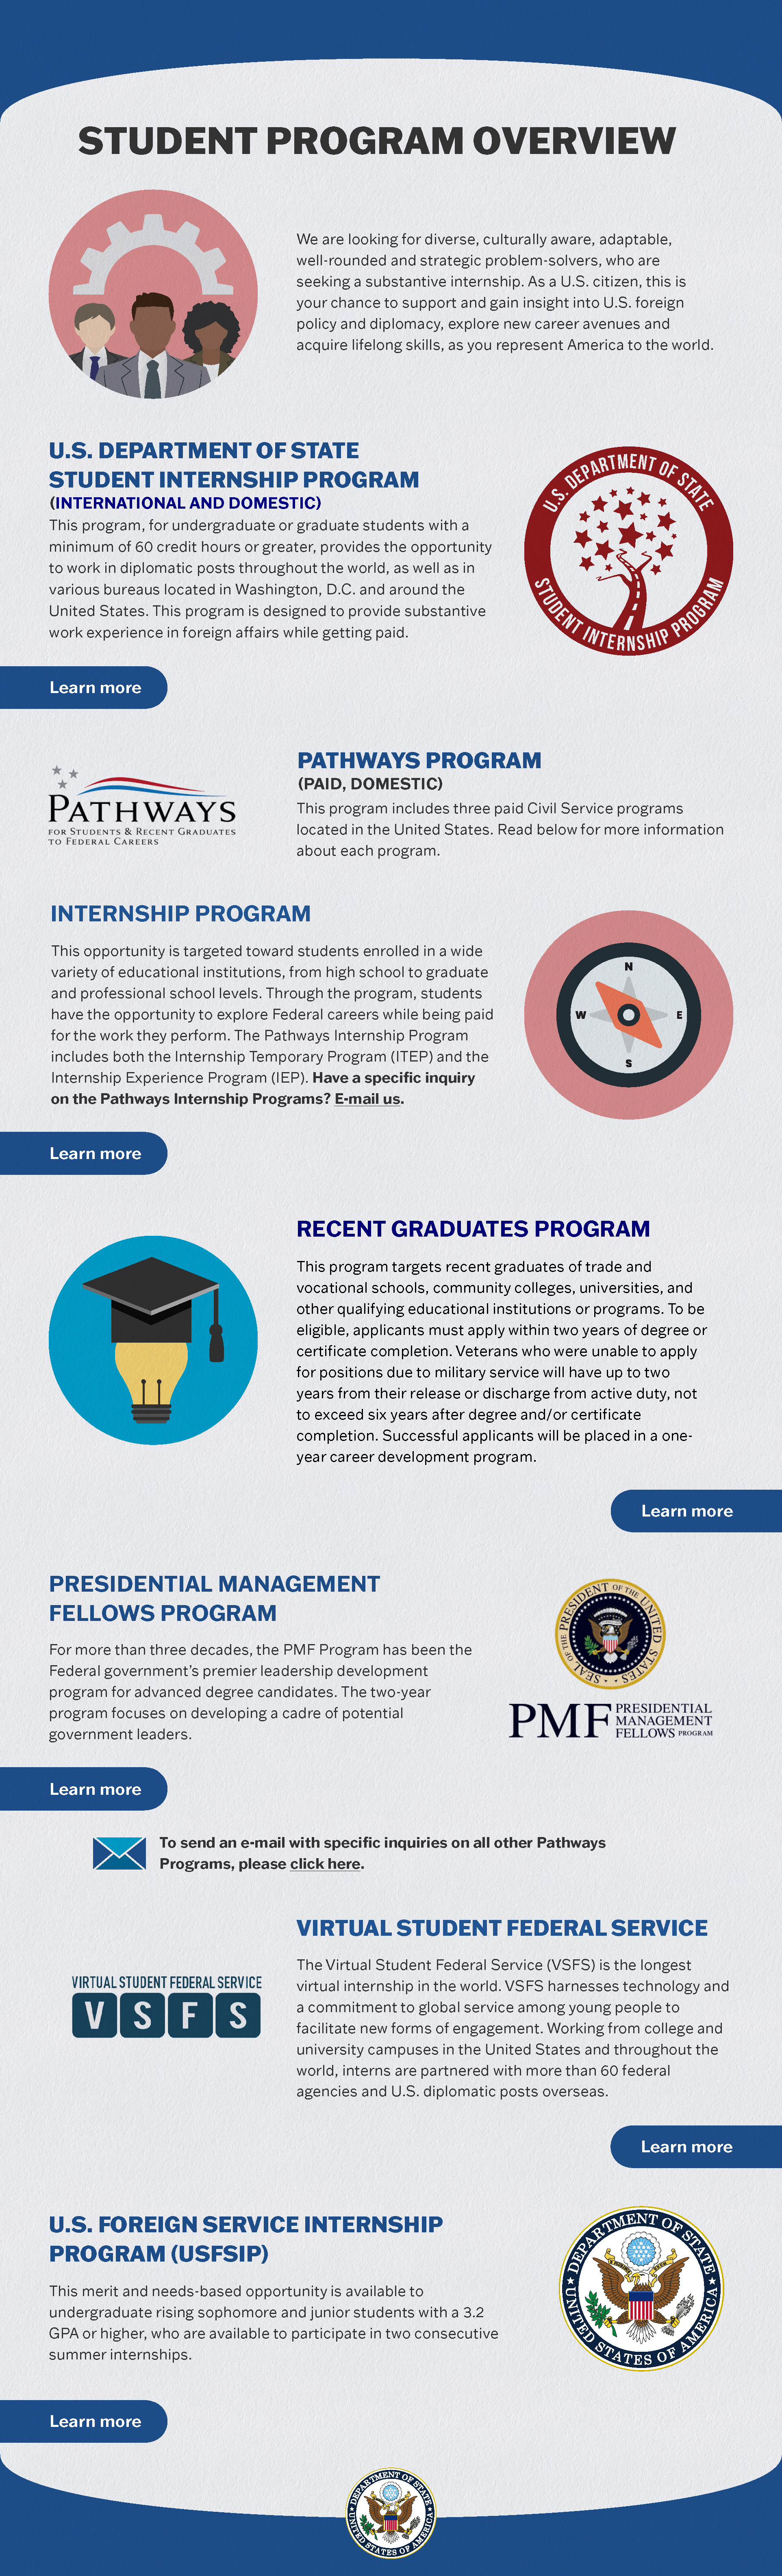 Student Programs Overview